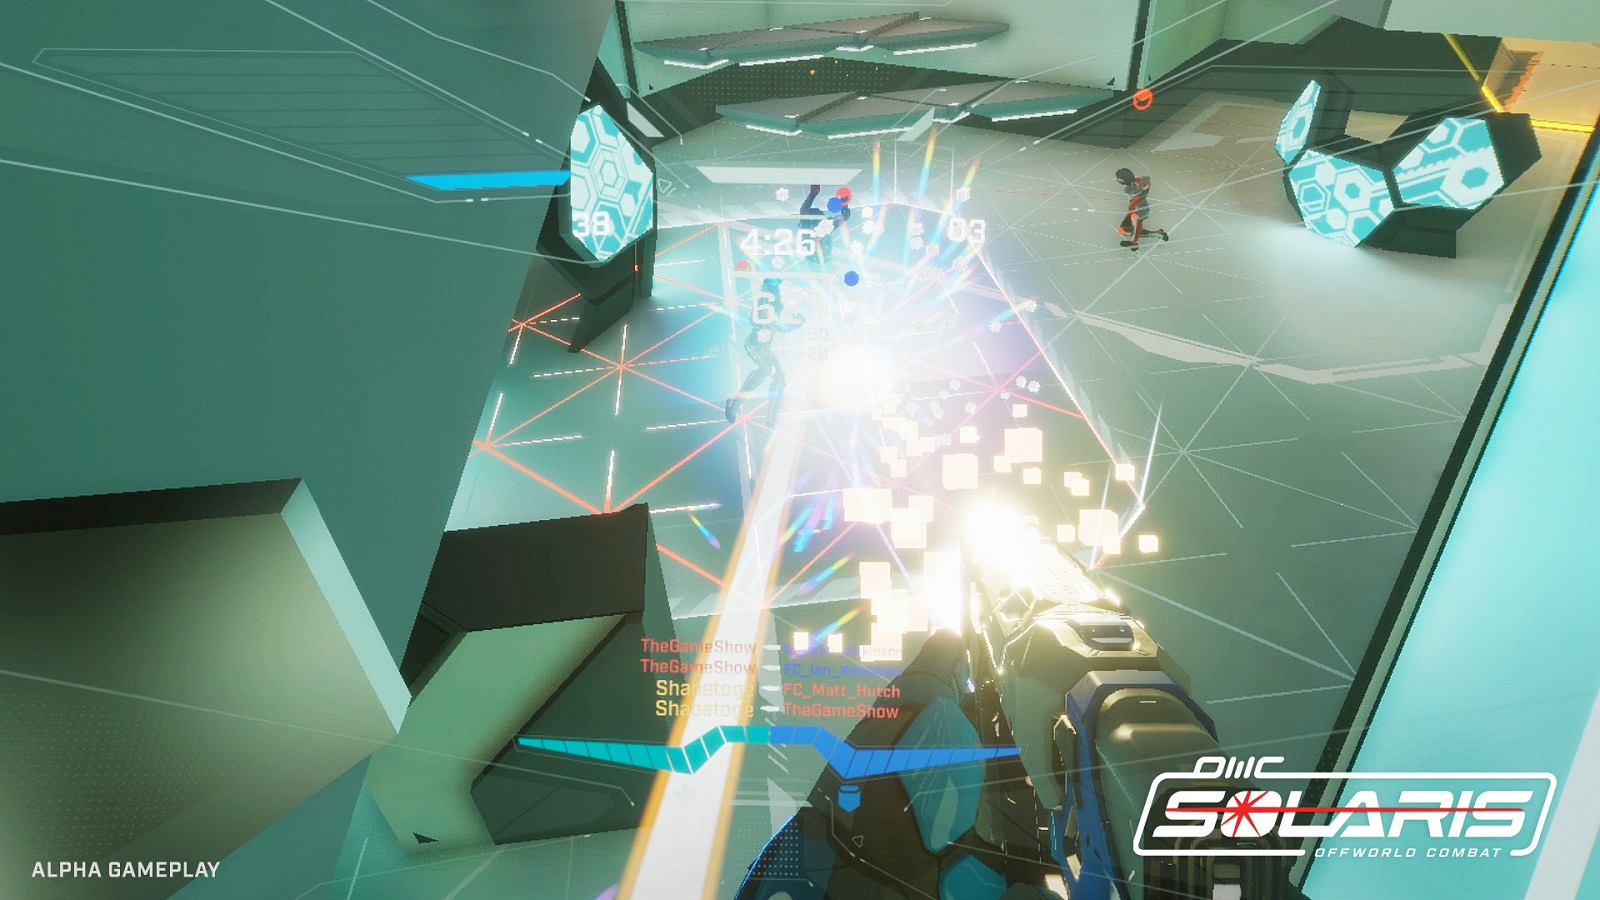 Stort univers arkitekt drag It's a futuristic fight to the death as Solaris Offworld Combat heads to VR  this August - GAMING TREND